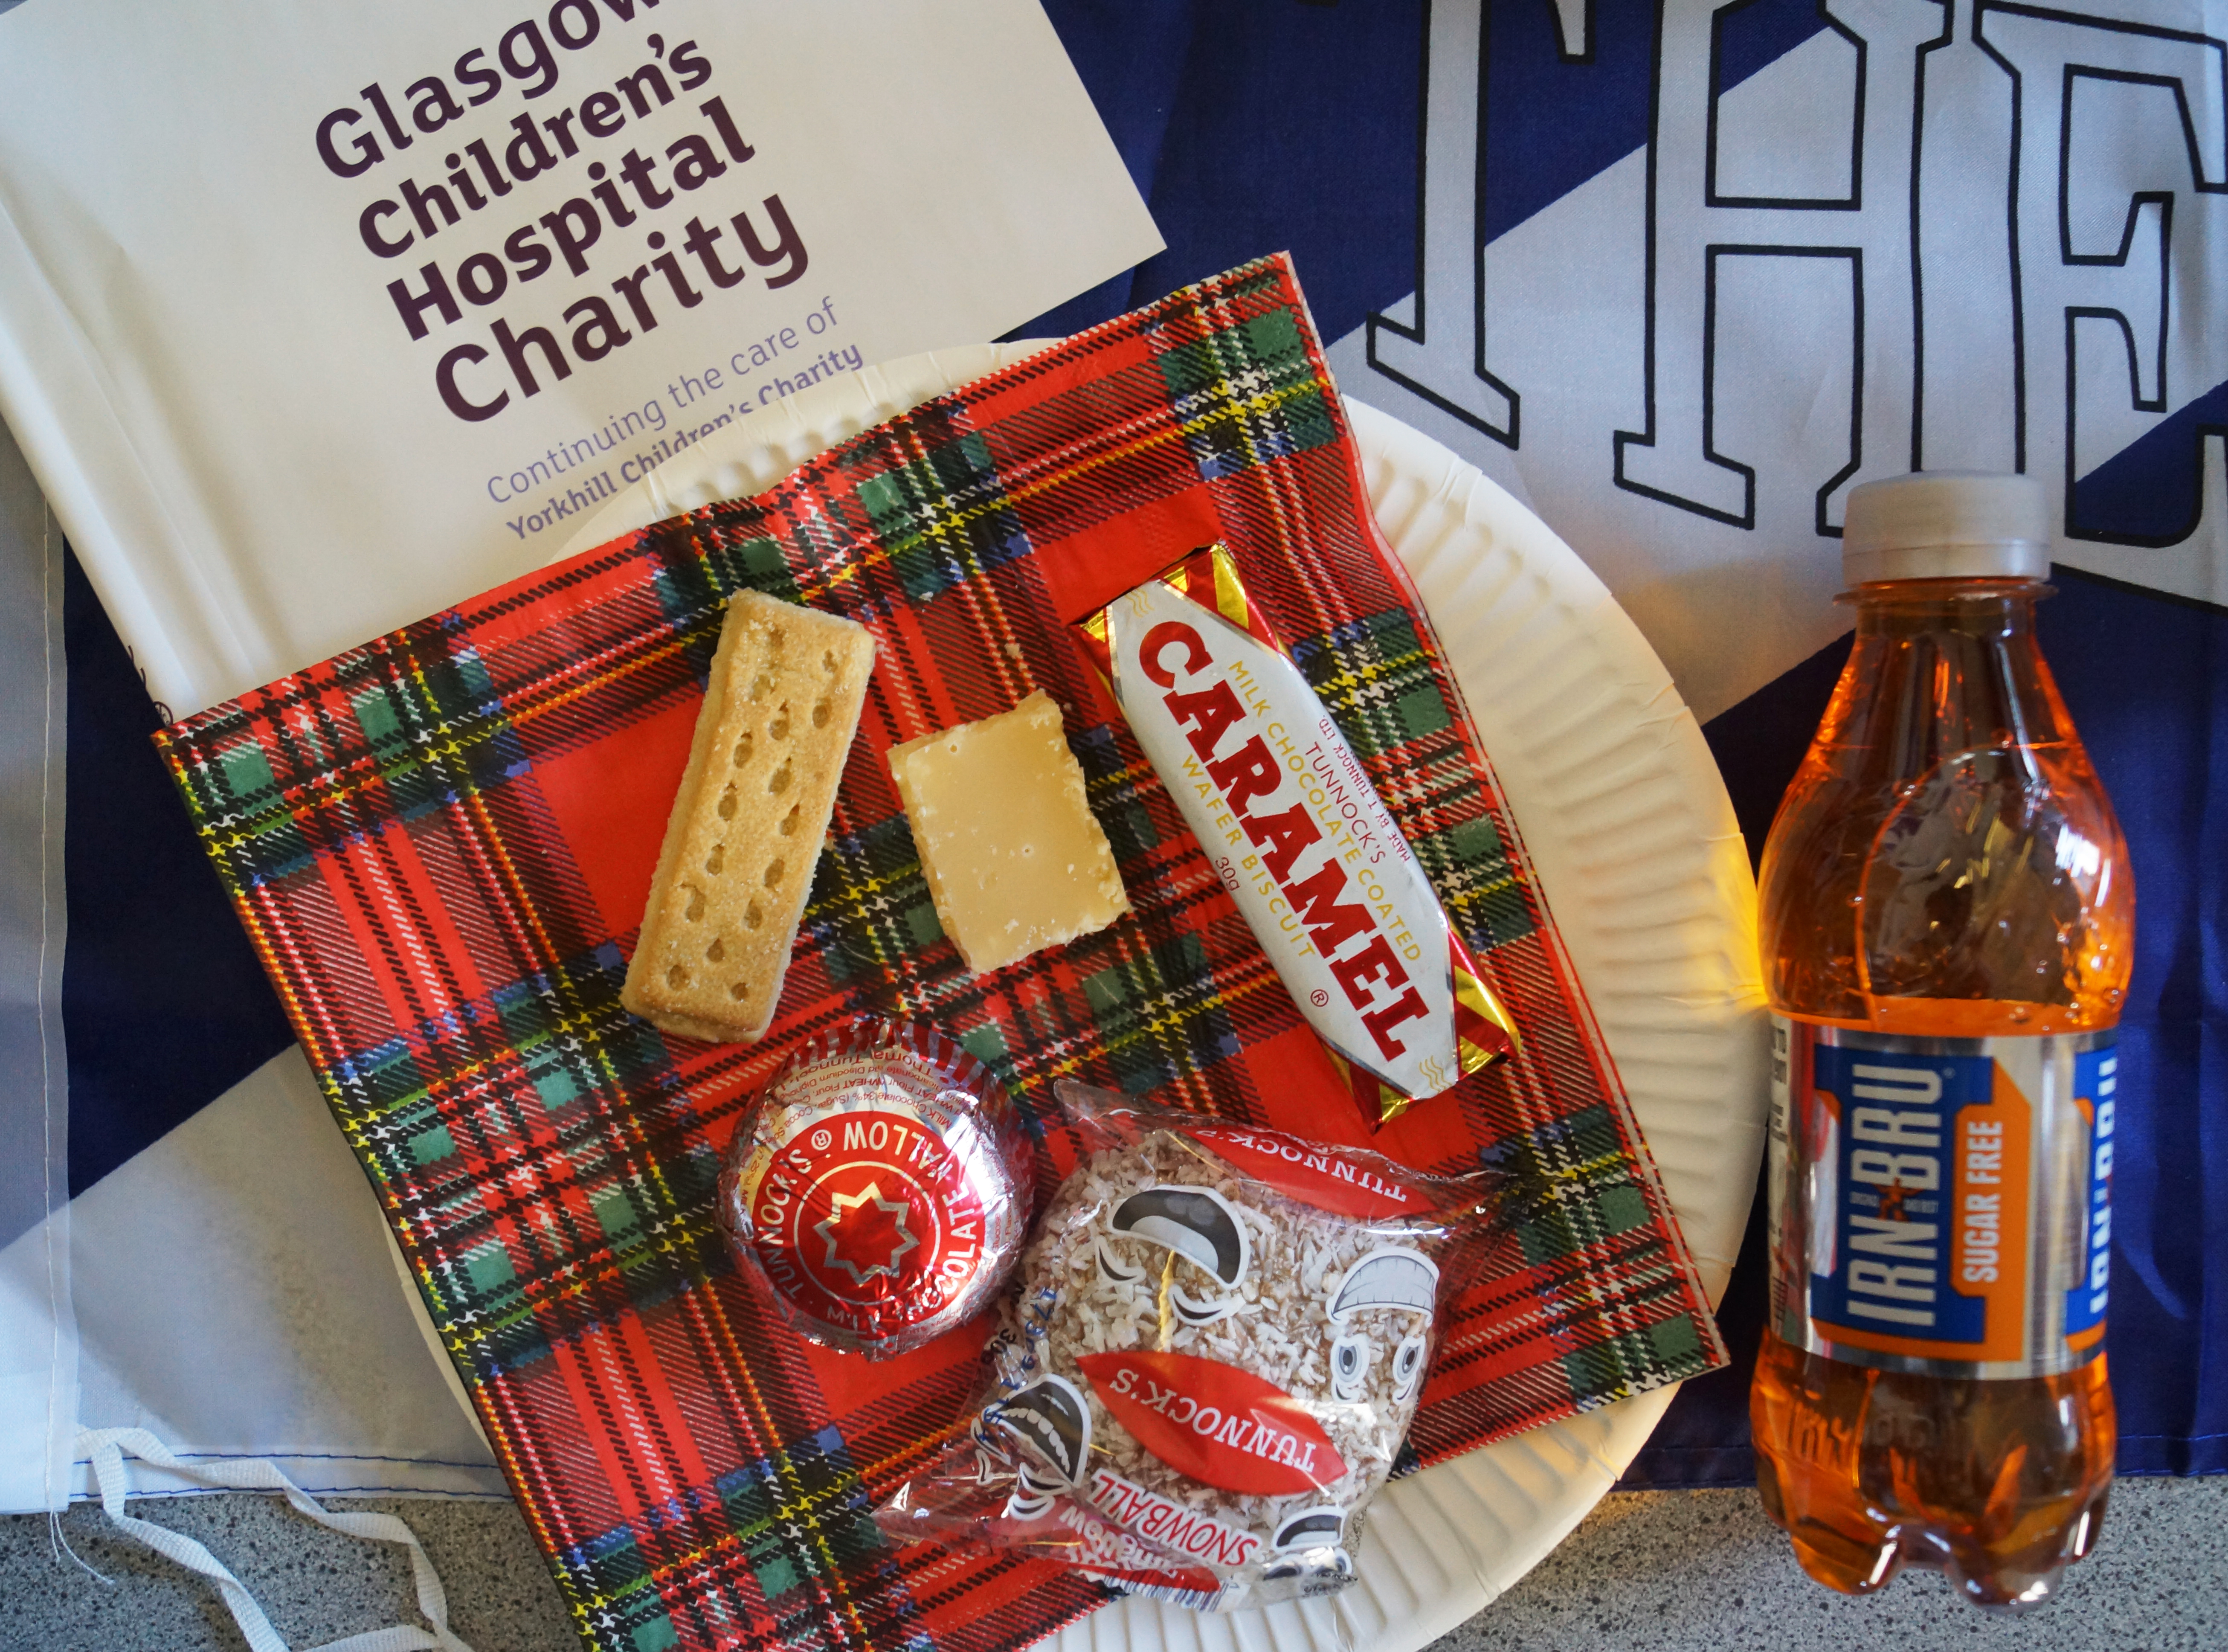 S4 Celebrates St Andrewâ€™s Day with a Fundraiser